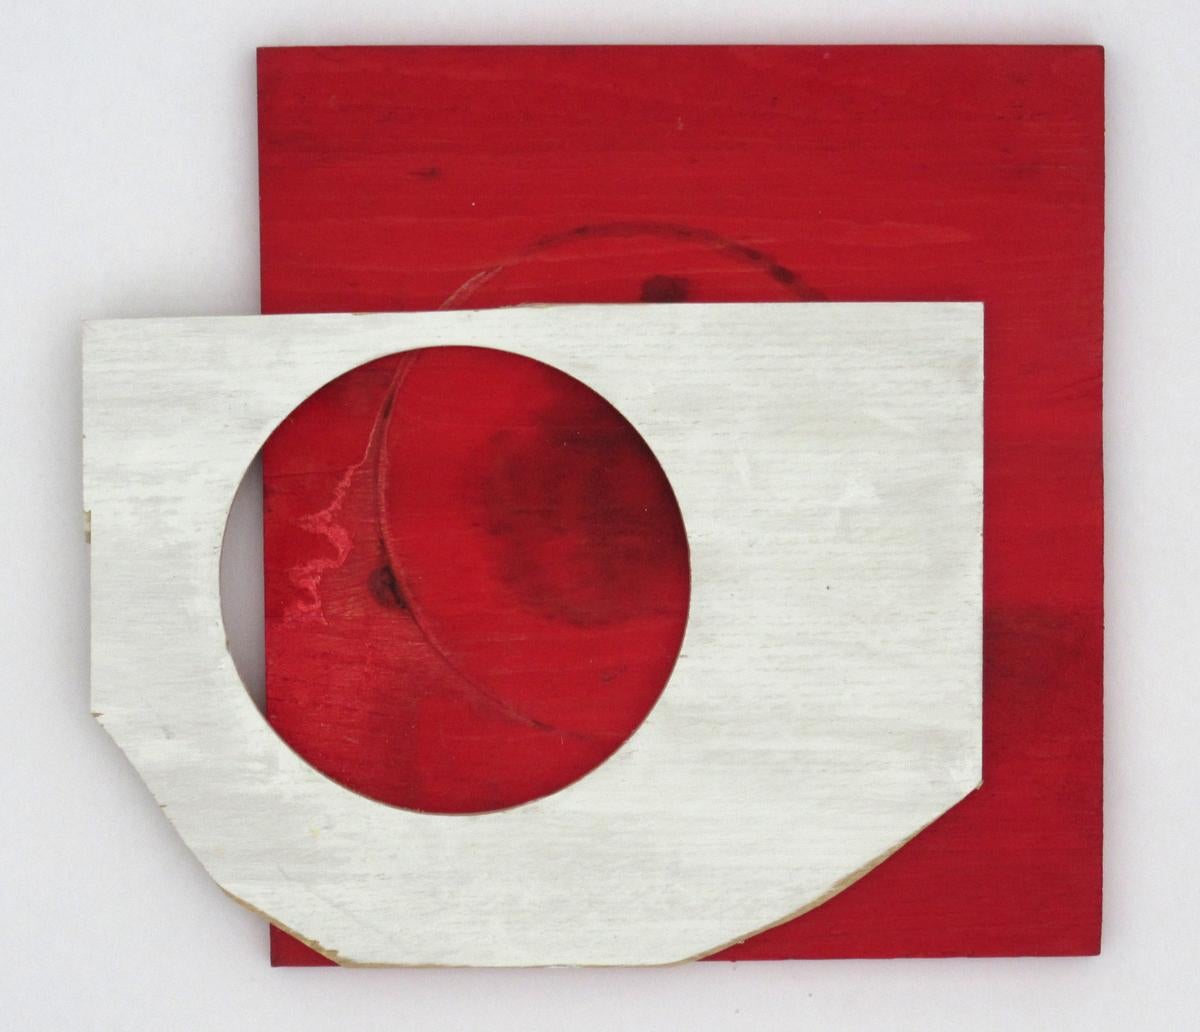 Diane Englander, White Form on Red Wood, 2018, scrapwood and acrylic, 12 x 13 in